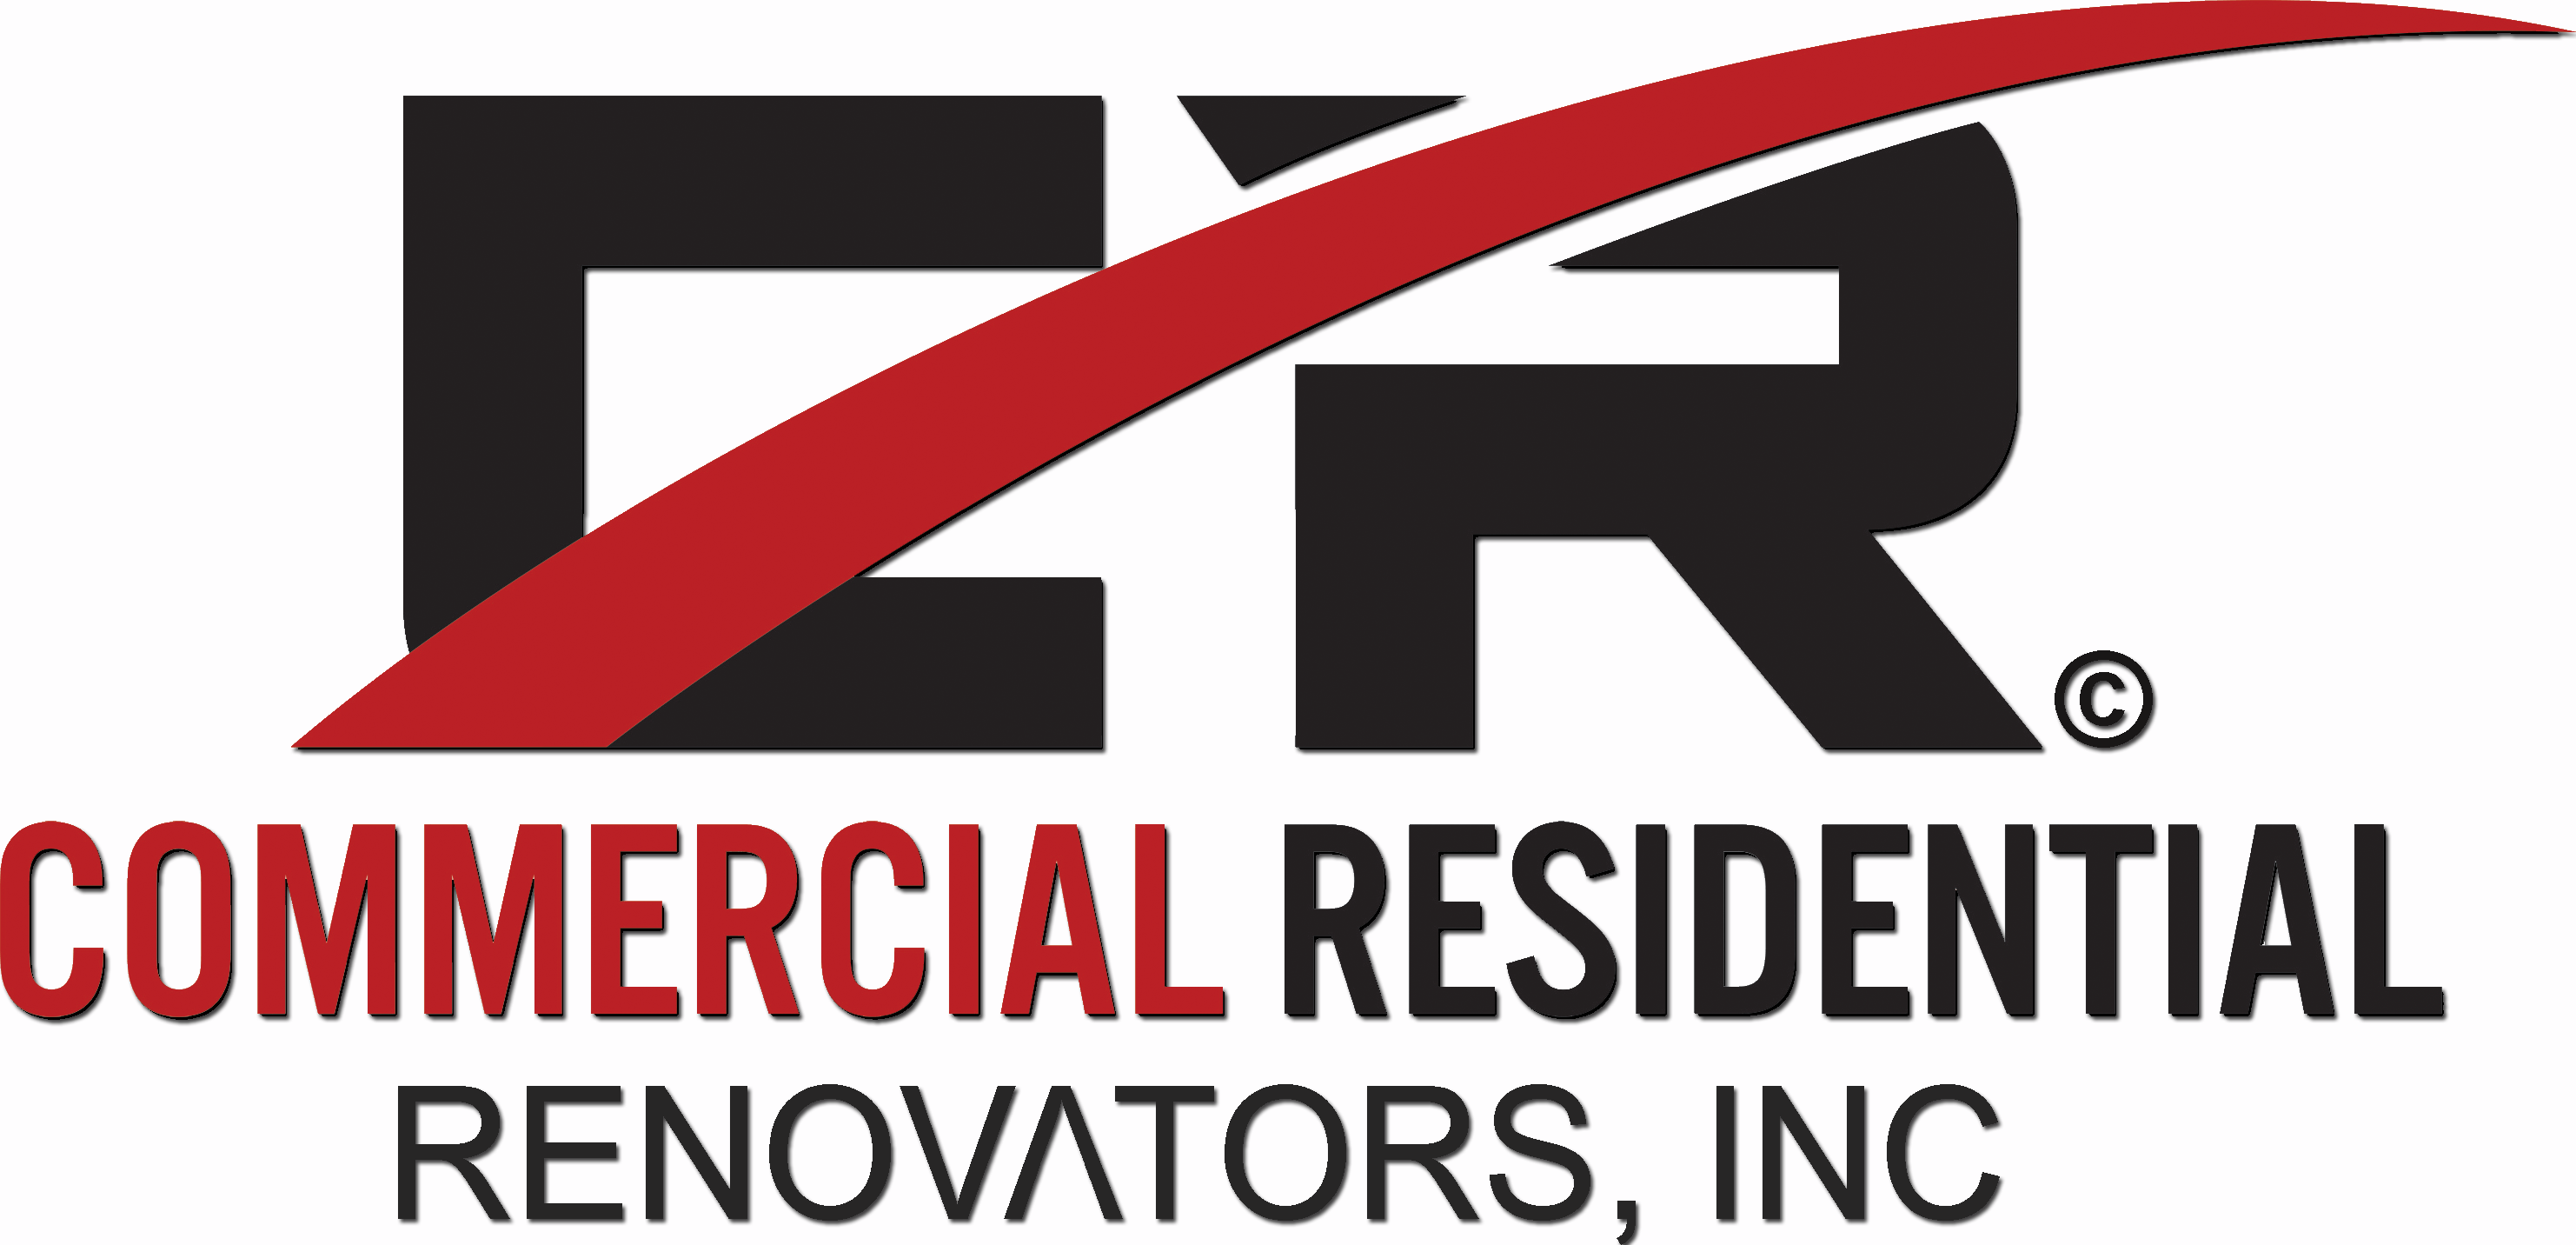 CR Renovators | Illinois Roofing Contractor, Chicago Roofing Contractor, Roof Repair & Installation, Residential, Commercial